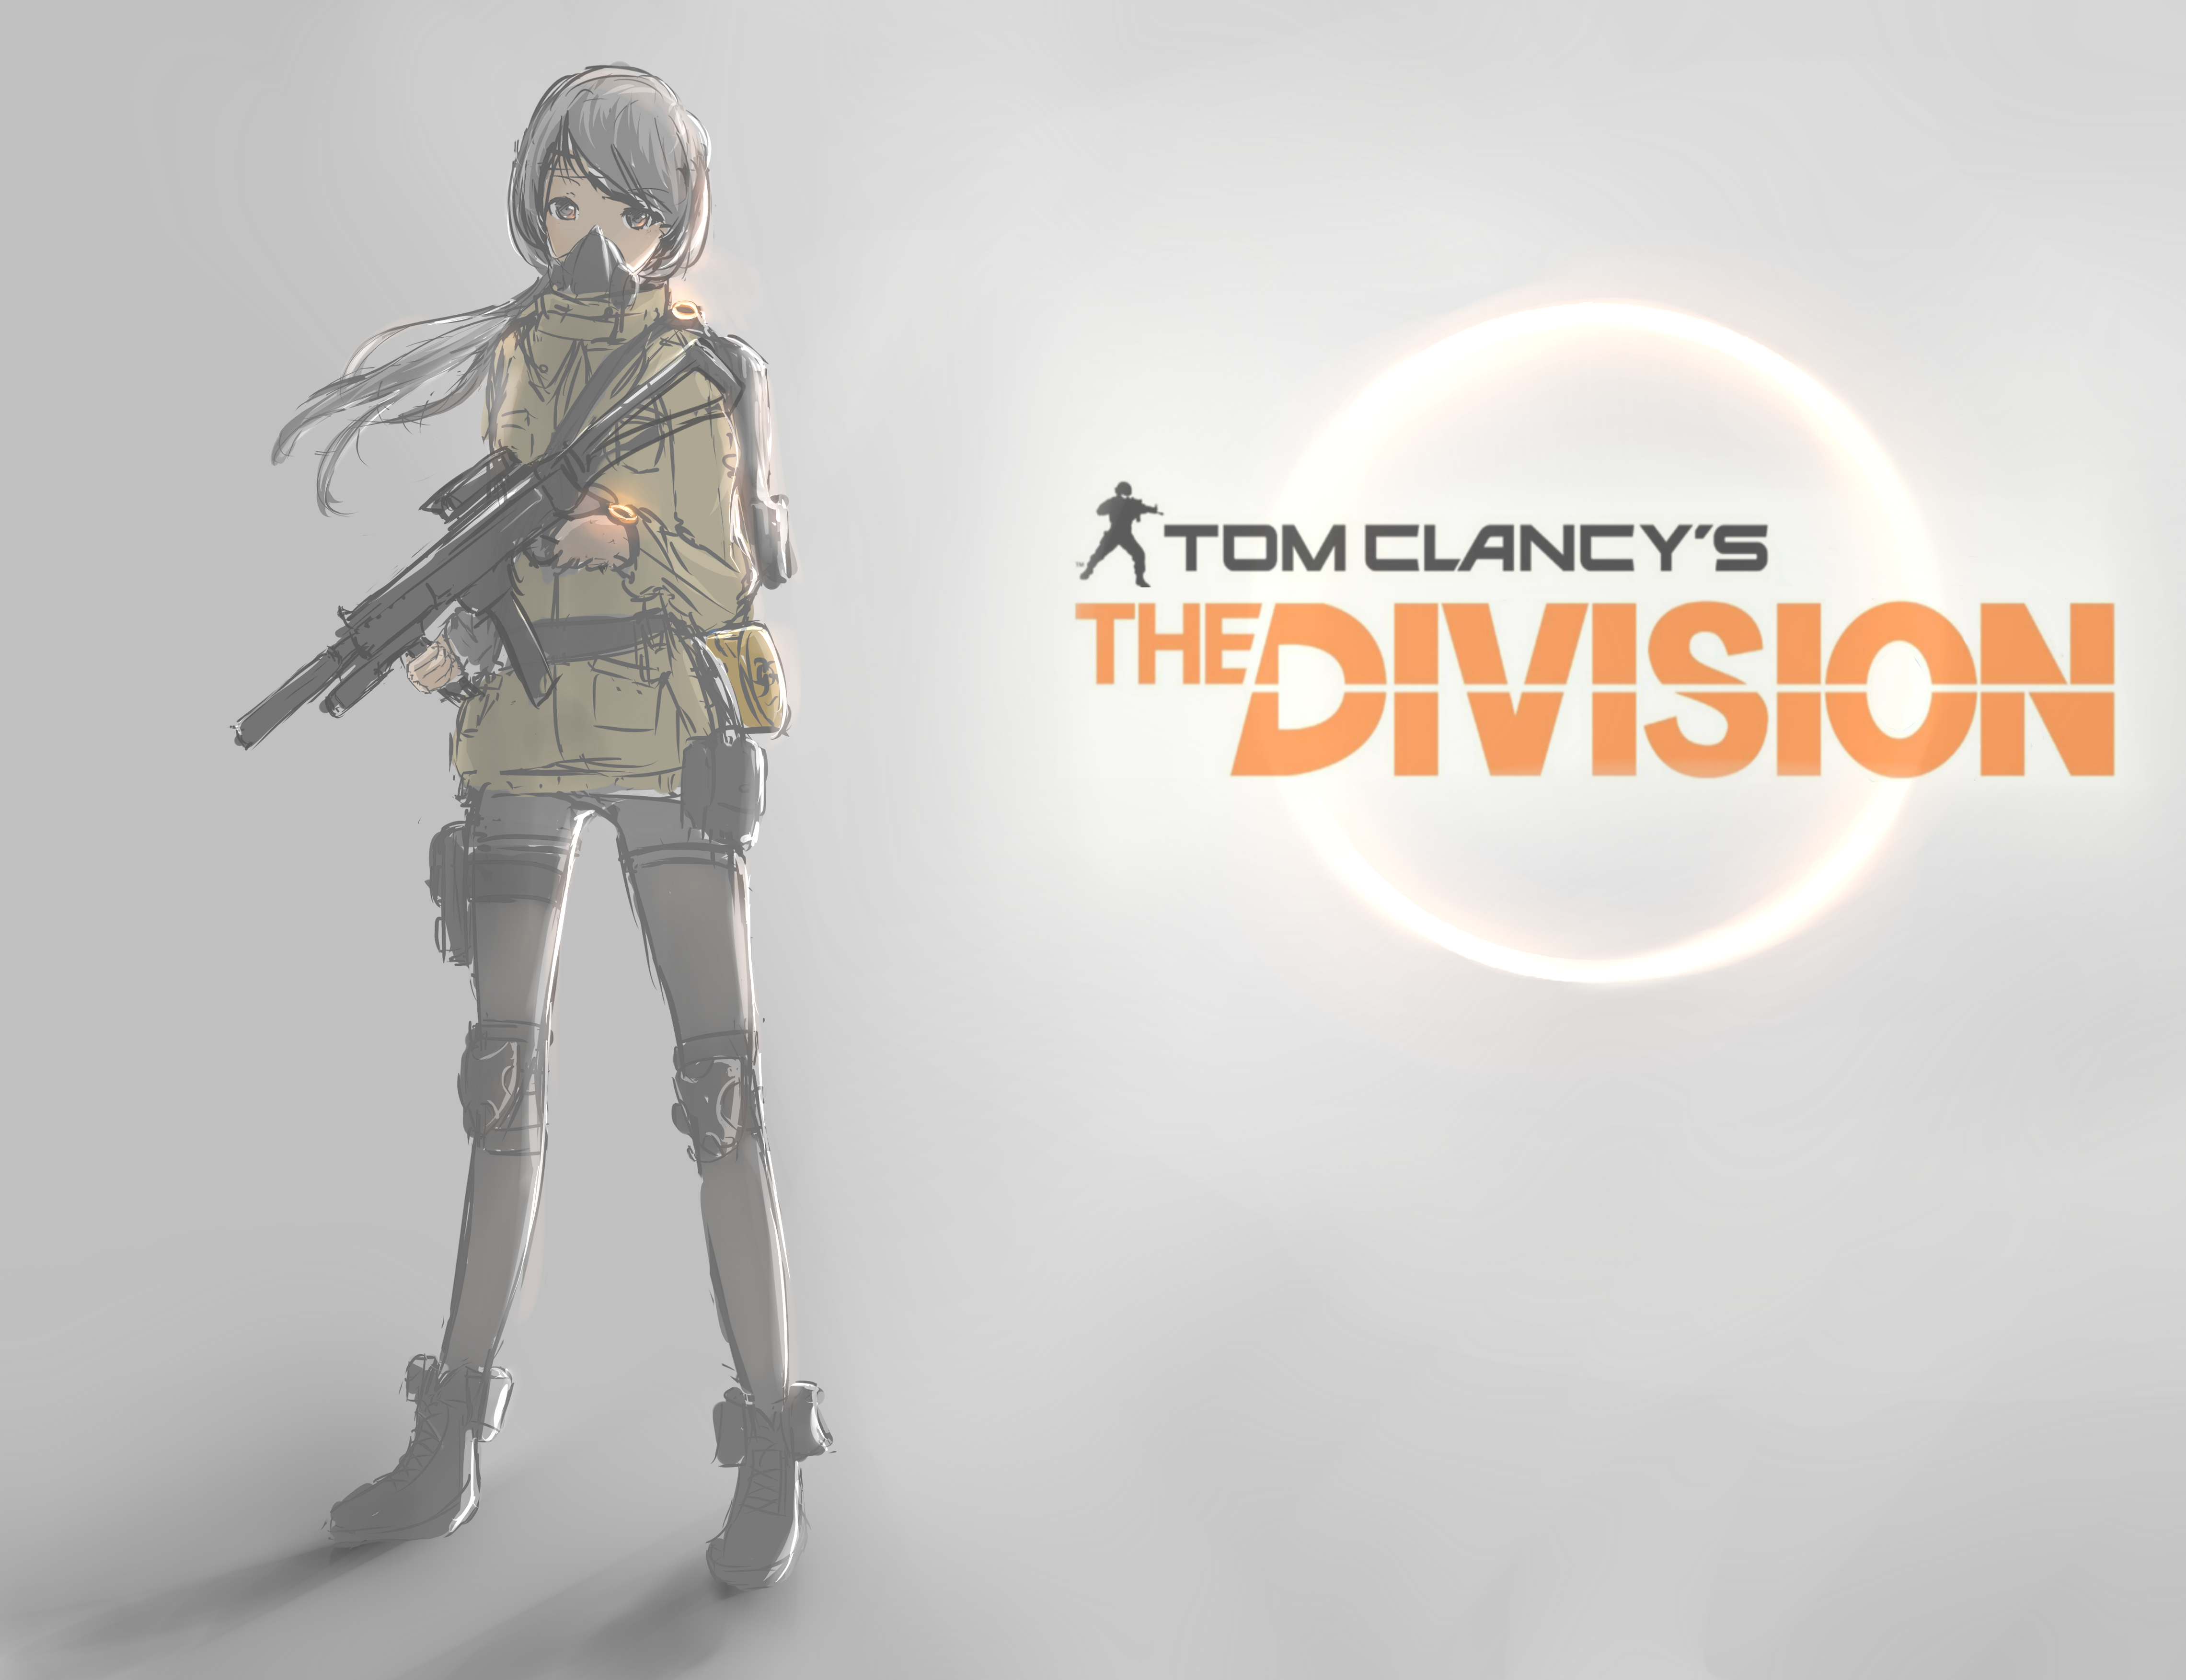 Restoria Anime Anime Girls Tom Clancys The Division Video Games PC Gaming Weapon Mask Simple Backgro 4562x3507